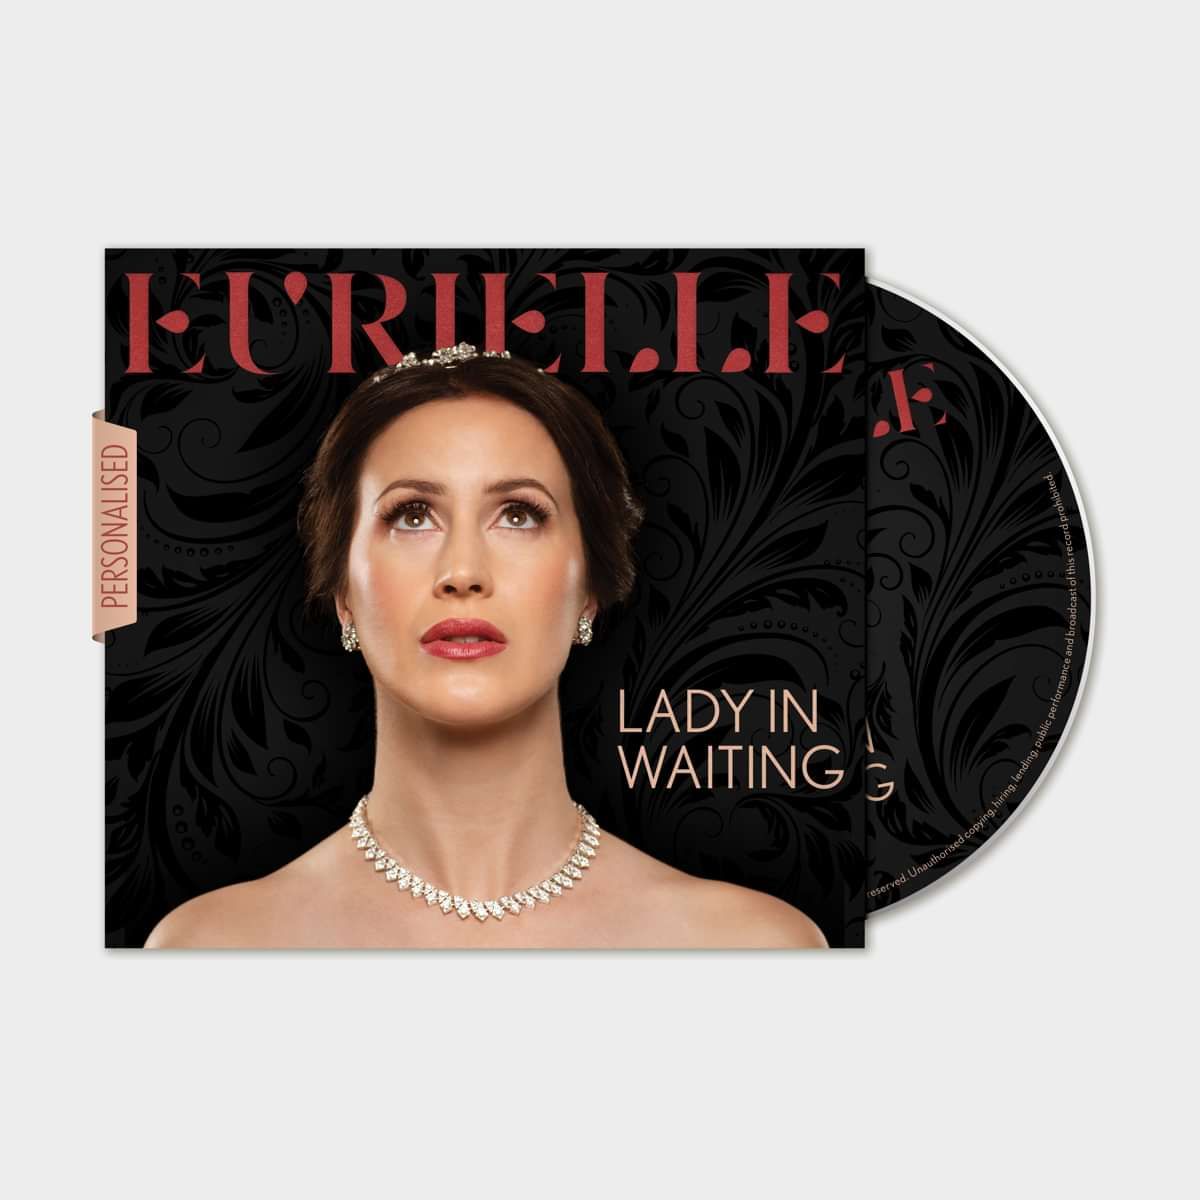 CD Bundle 15% Discount: Buy 3 (Or Any Multiple Of 3) Different CDs From Eurielle's Store - Eurielle